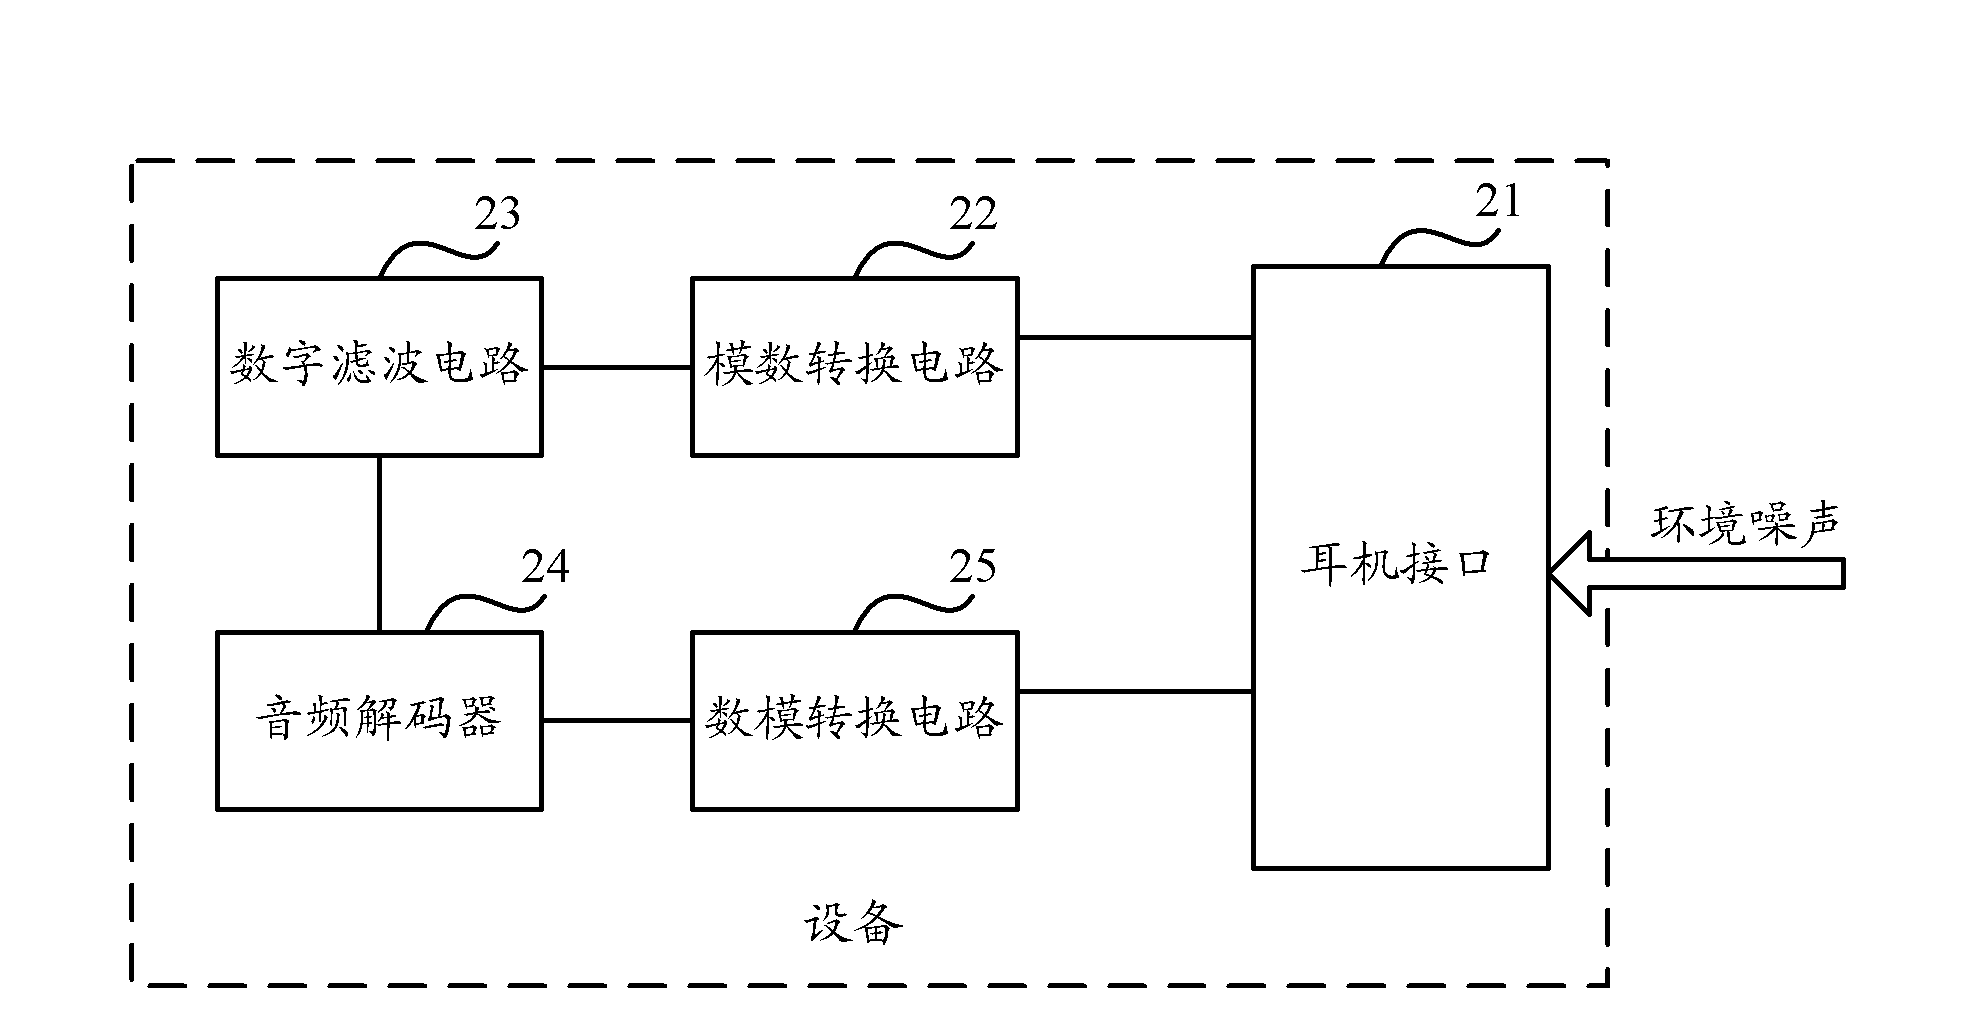 Method, equipment and system for reducing headset noise